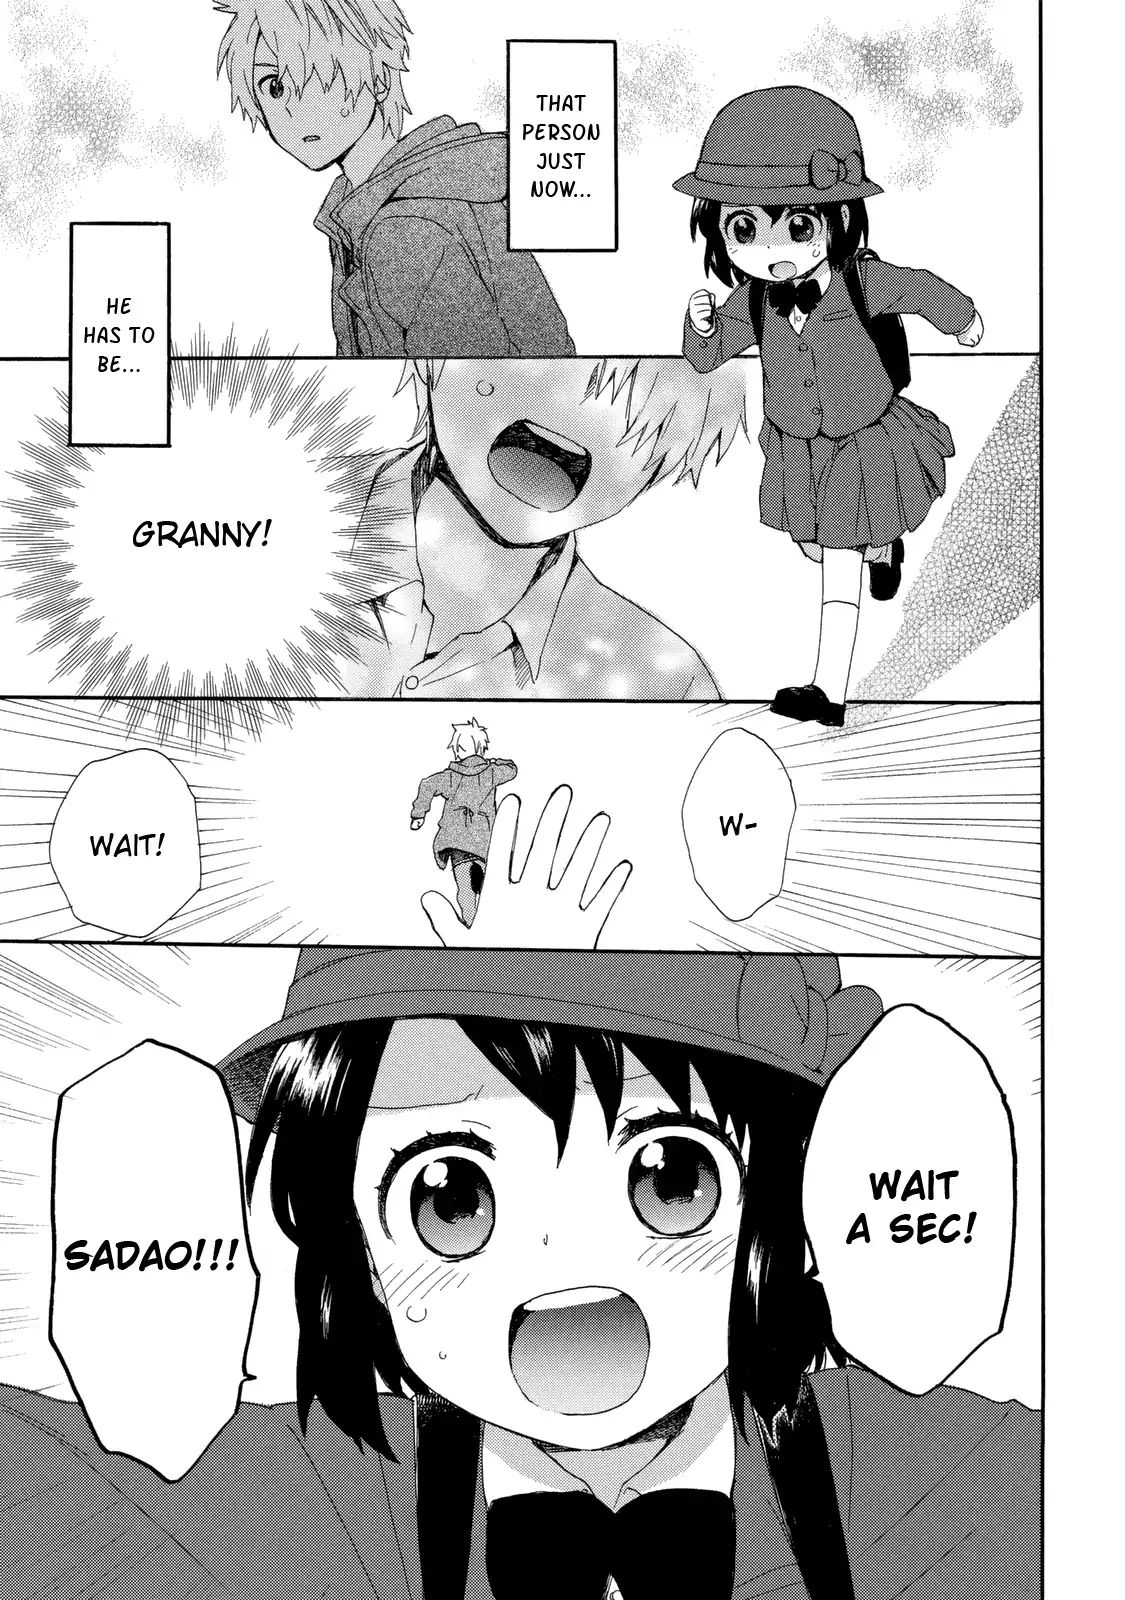 The Cute Little Granny Girl Hinata-chan - chapter 21 - #3